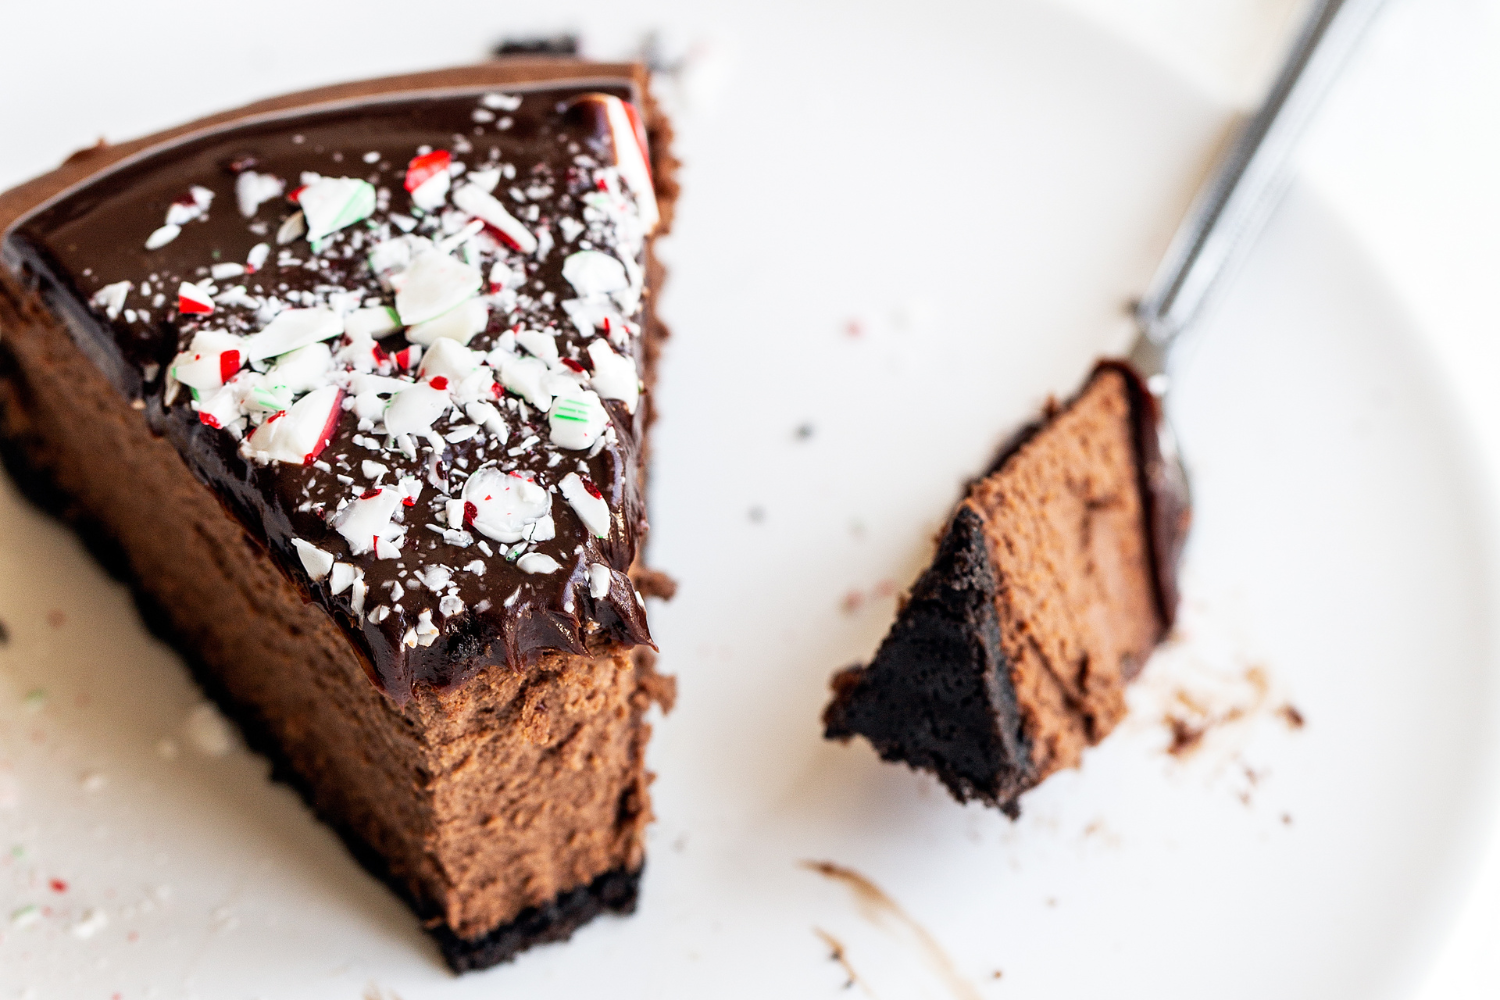 a slice of Chocolate Peppermint Cheesecake topped with ganache and crushed candy canes, on a plate with a fork, ready to take a bite.